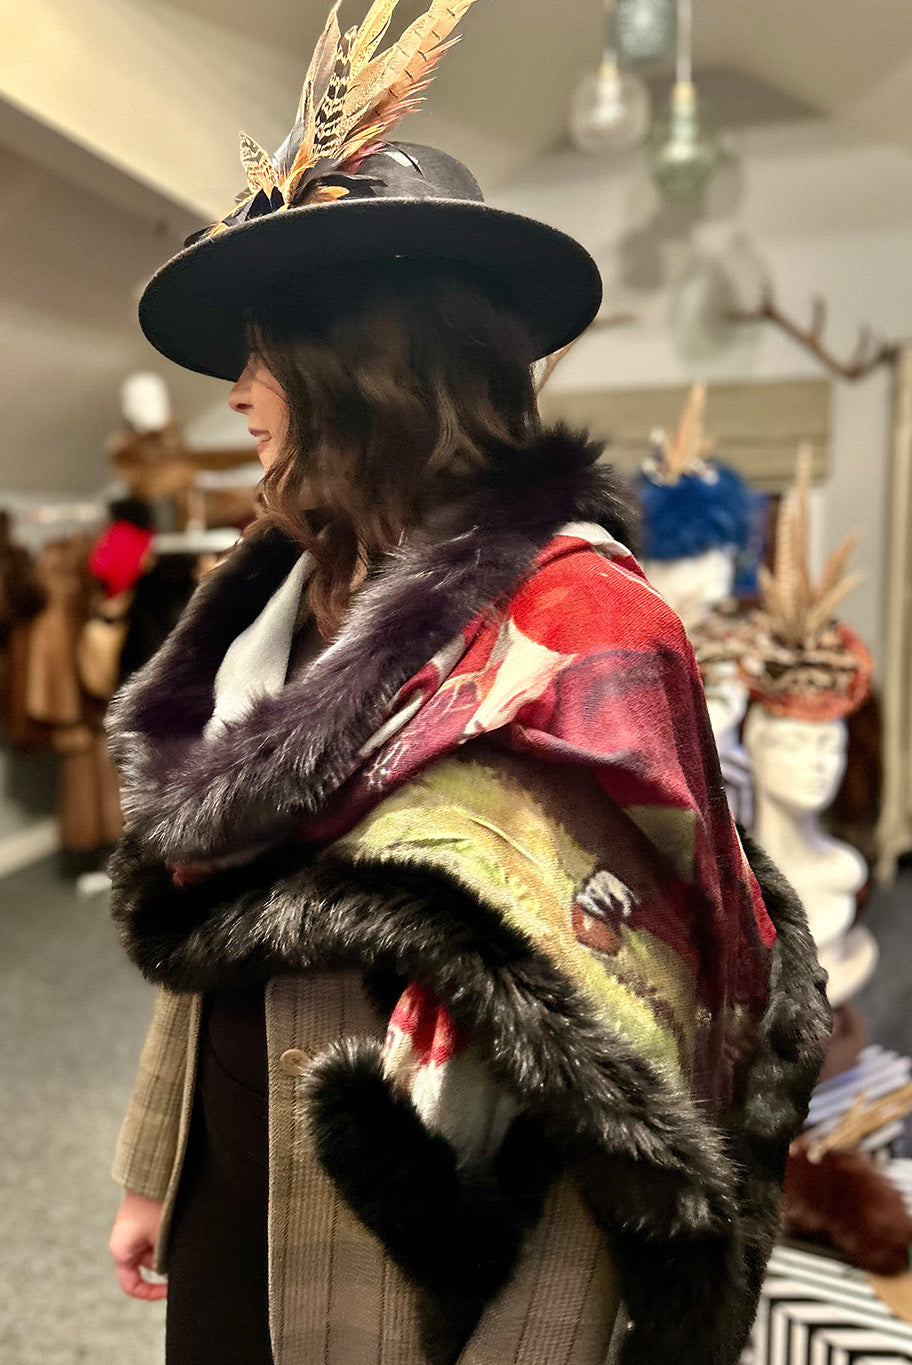 "Tally Ho" Cashmere and recycled fox fur wrap